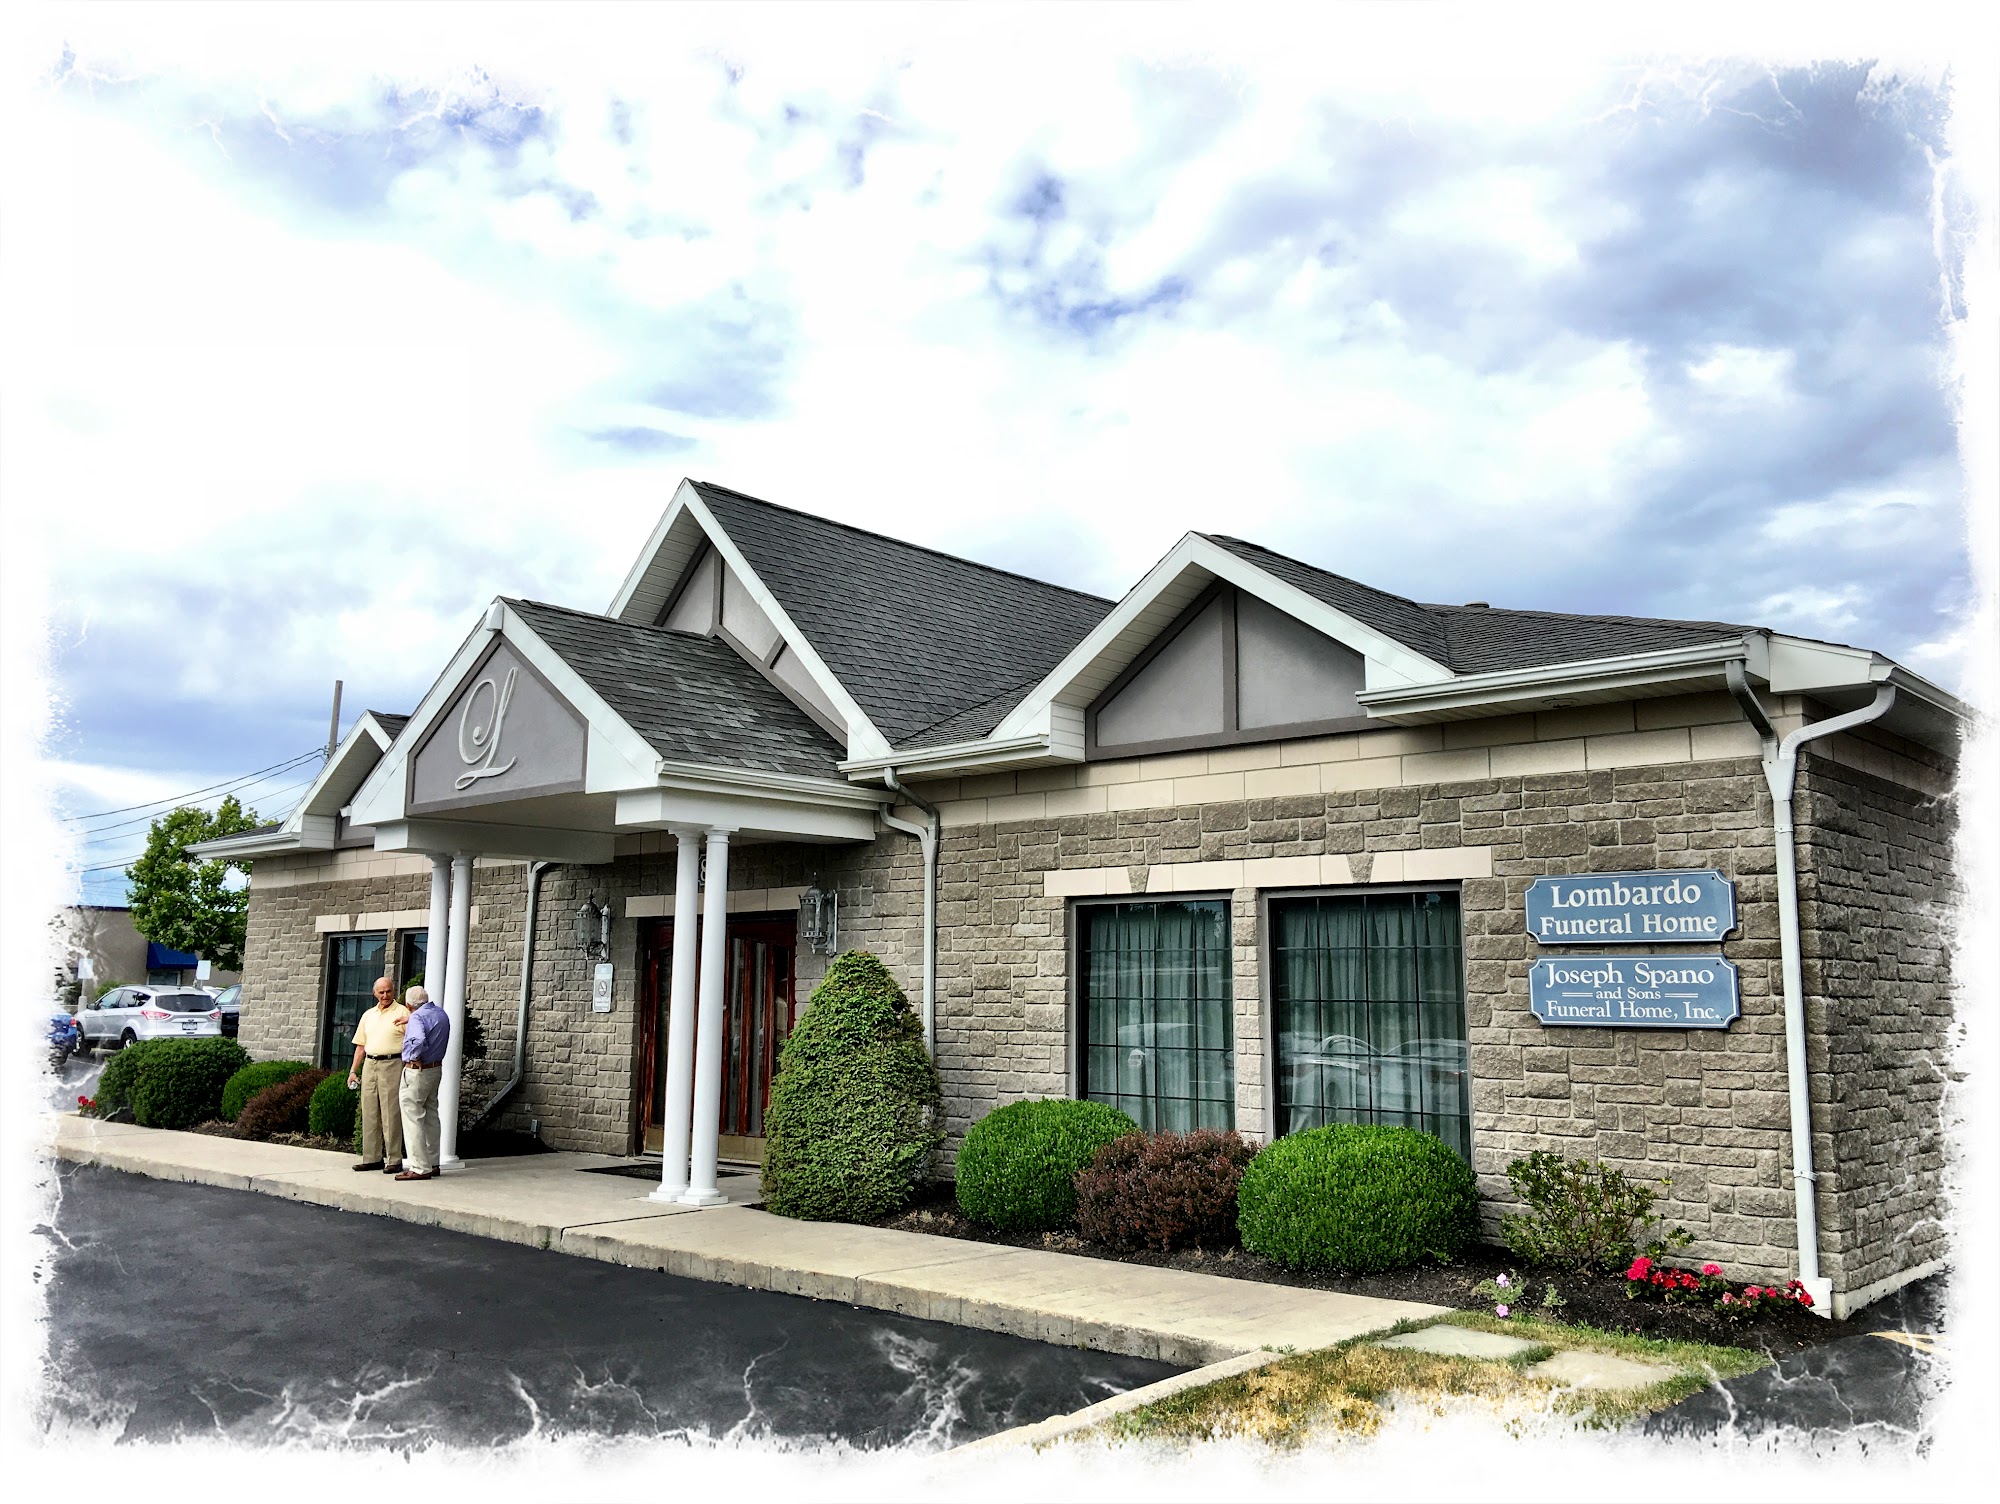 Lombardo Funeral Home - Amherst